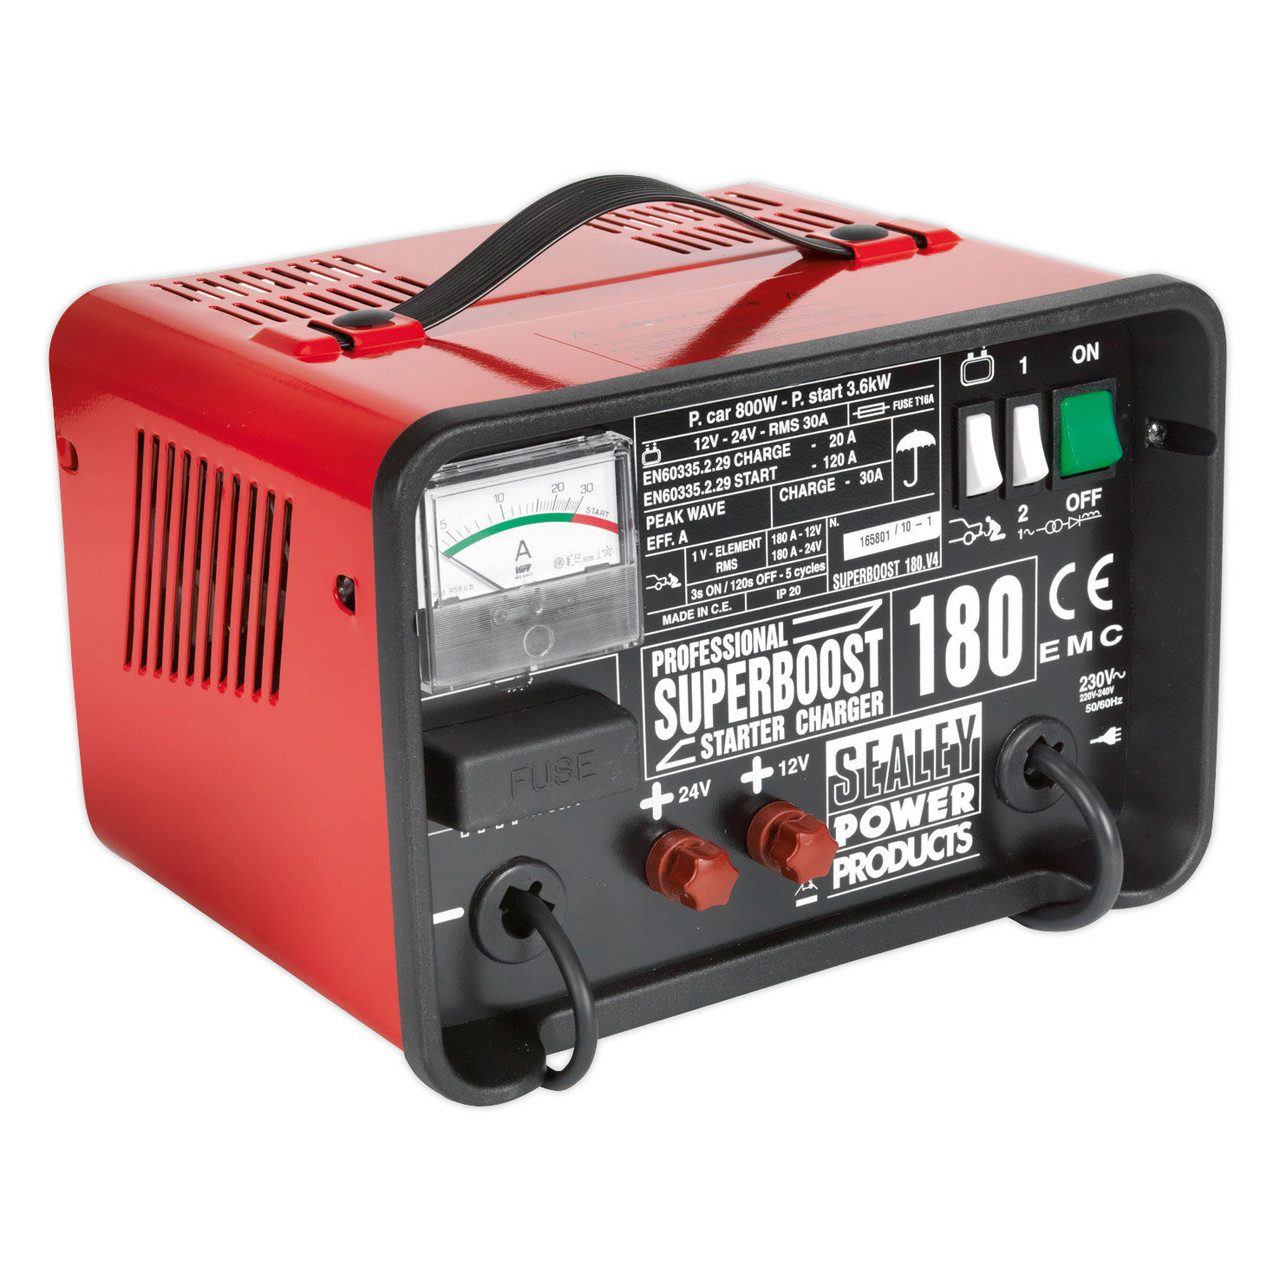 Photos - Power Tool Battery Sealey Superboost180 Starter/Charger 180/40Amp 12/24V 